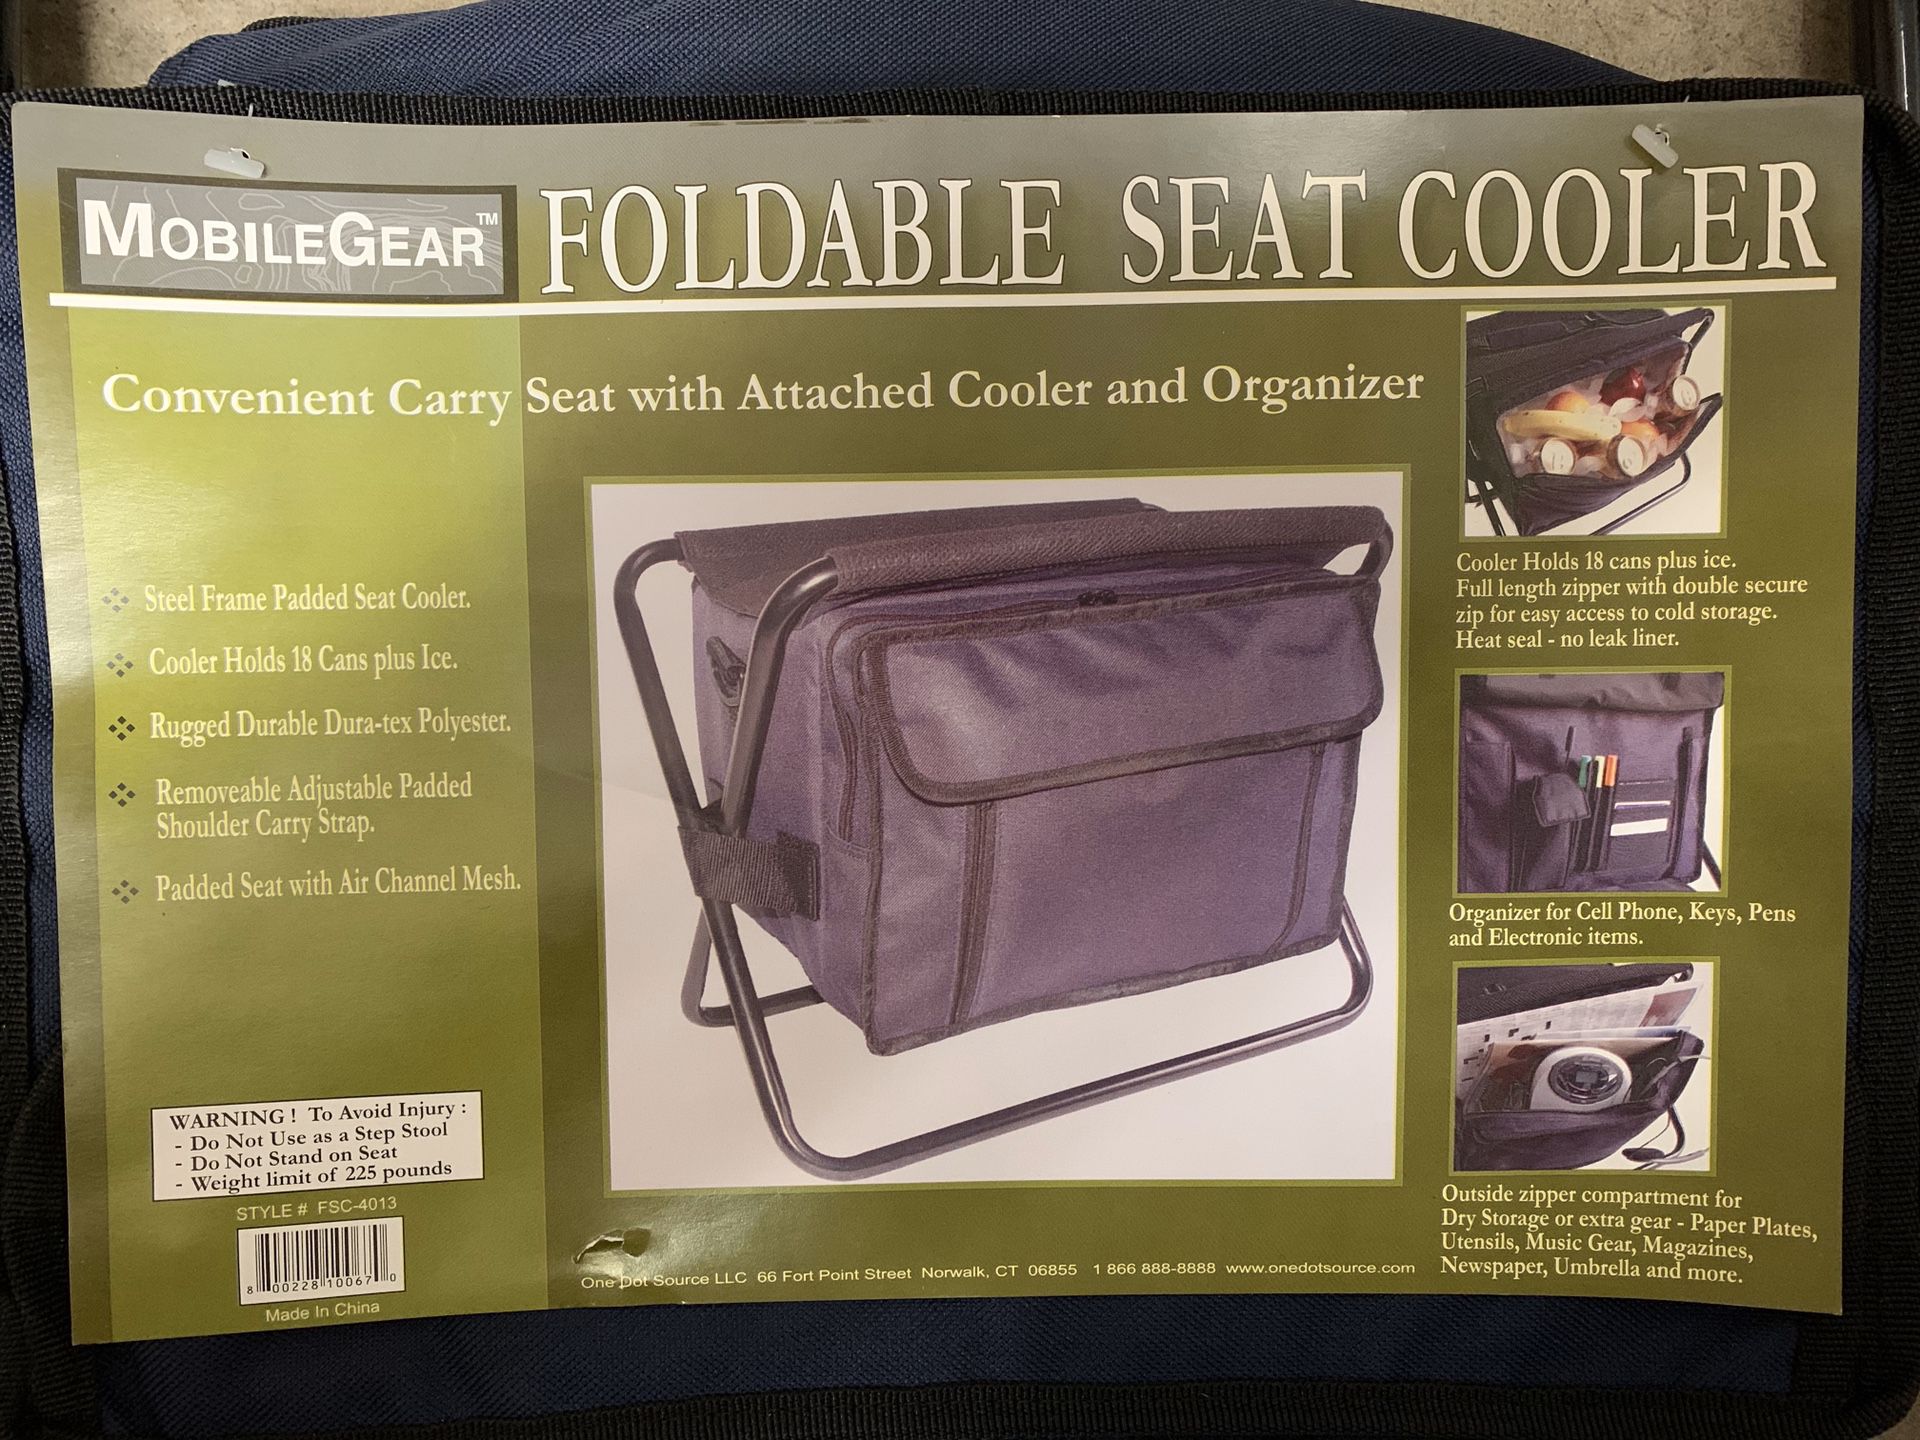 Foldable seat cooler